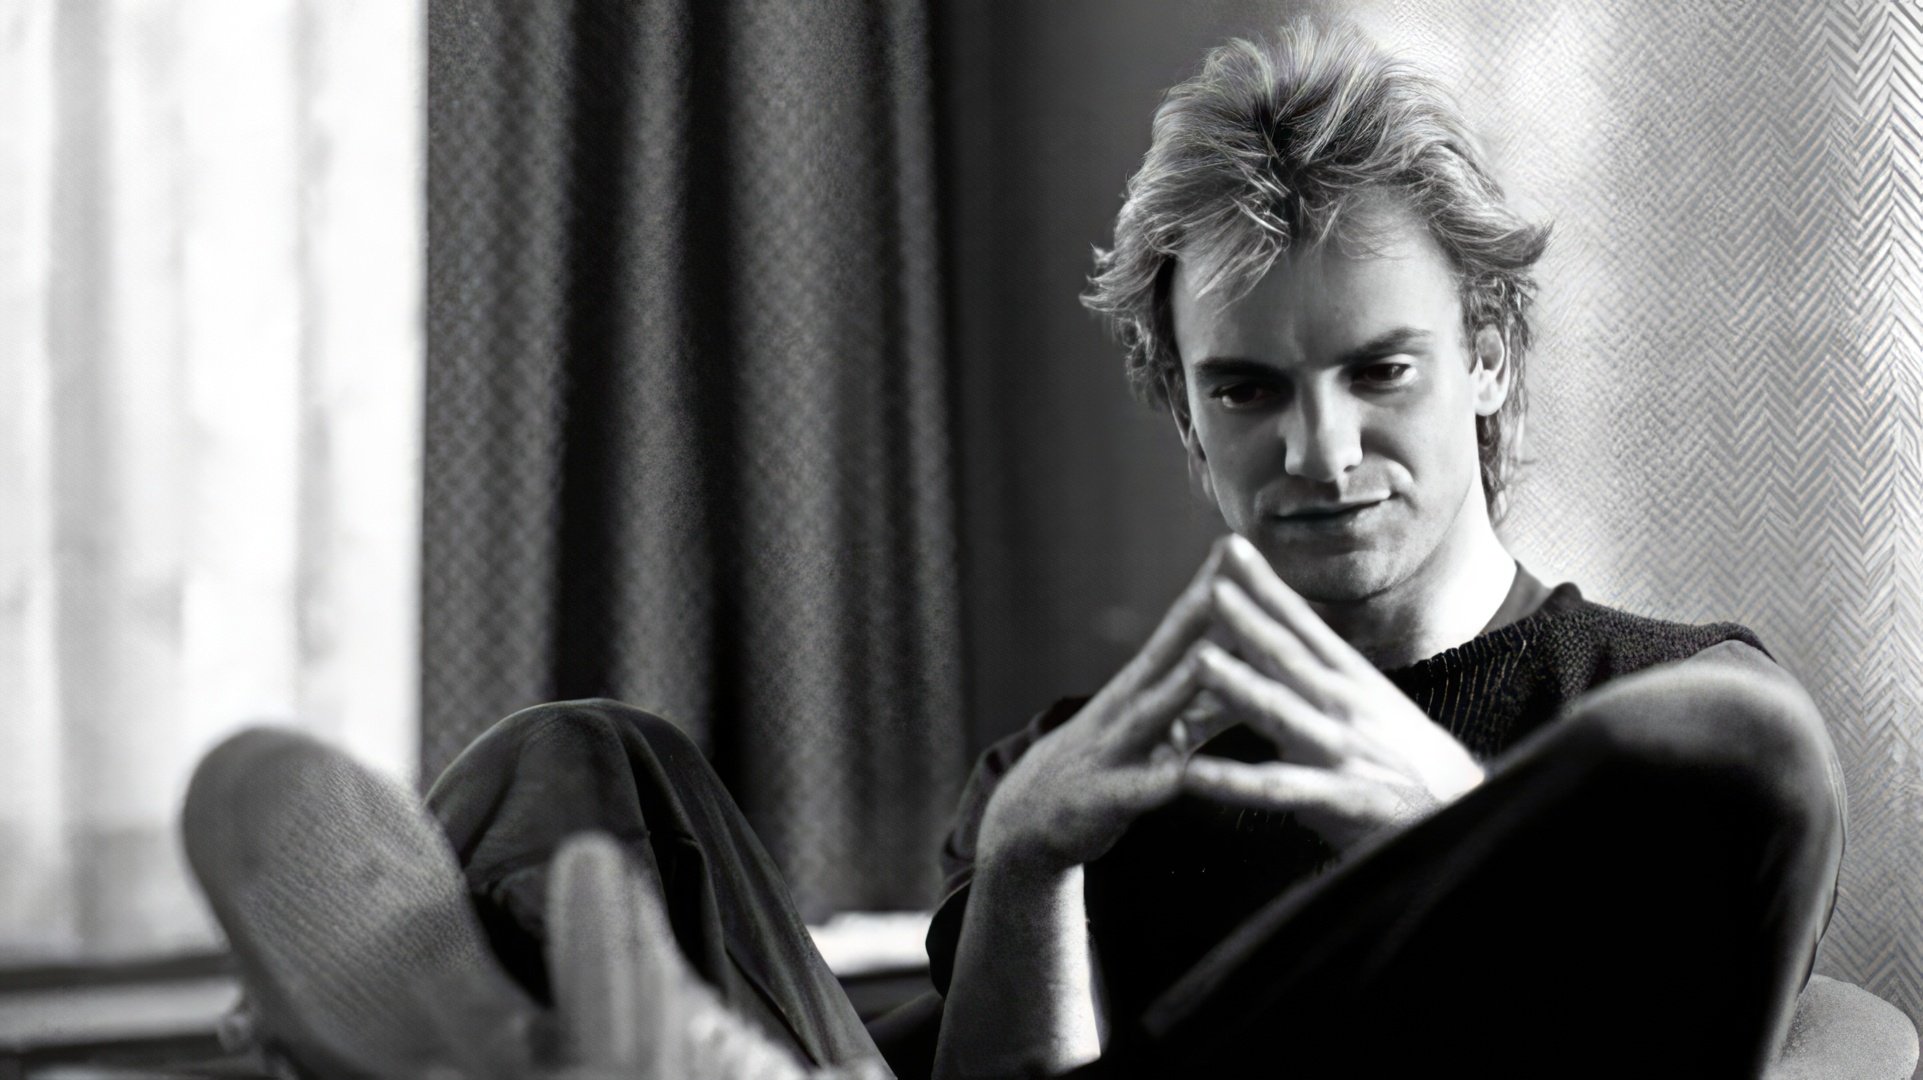 In the era of The Police, Sting was known as a brawler and a scandalous figure